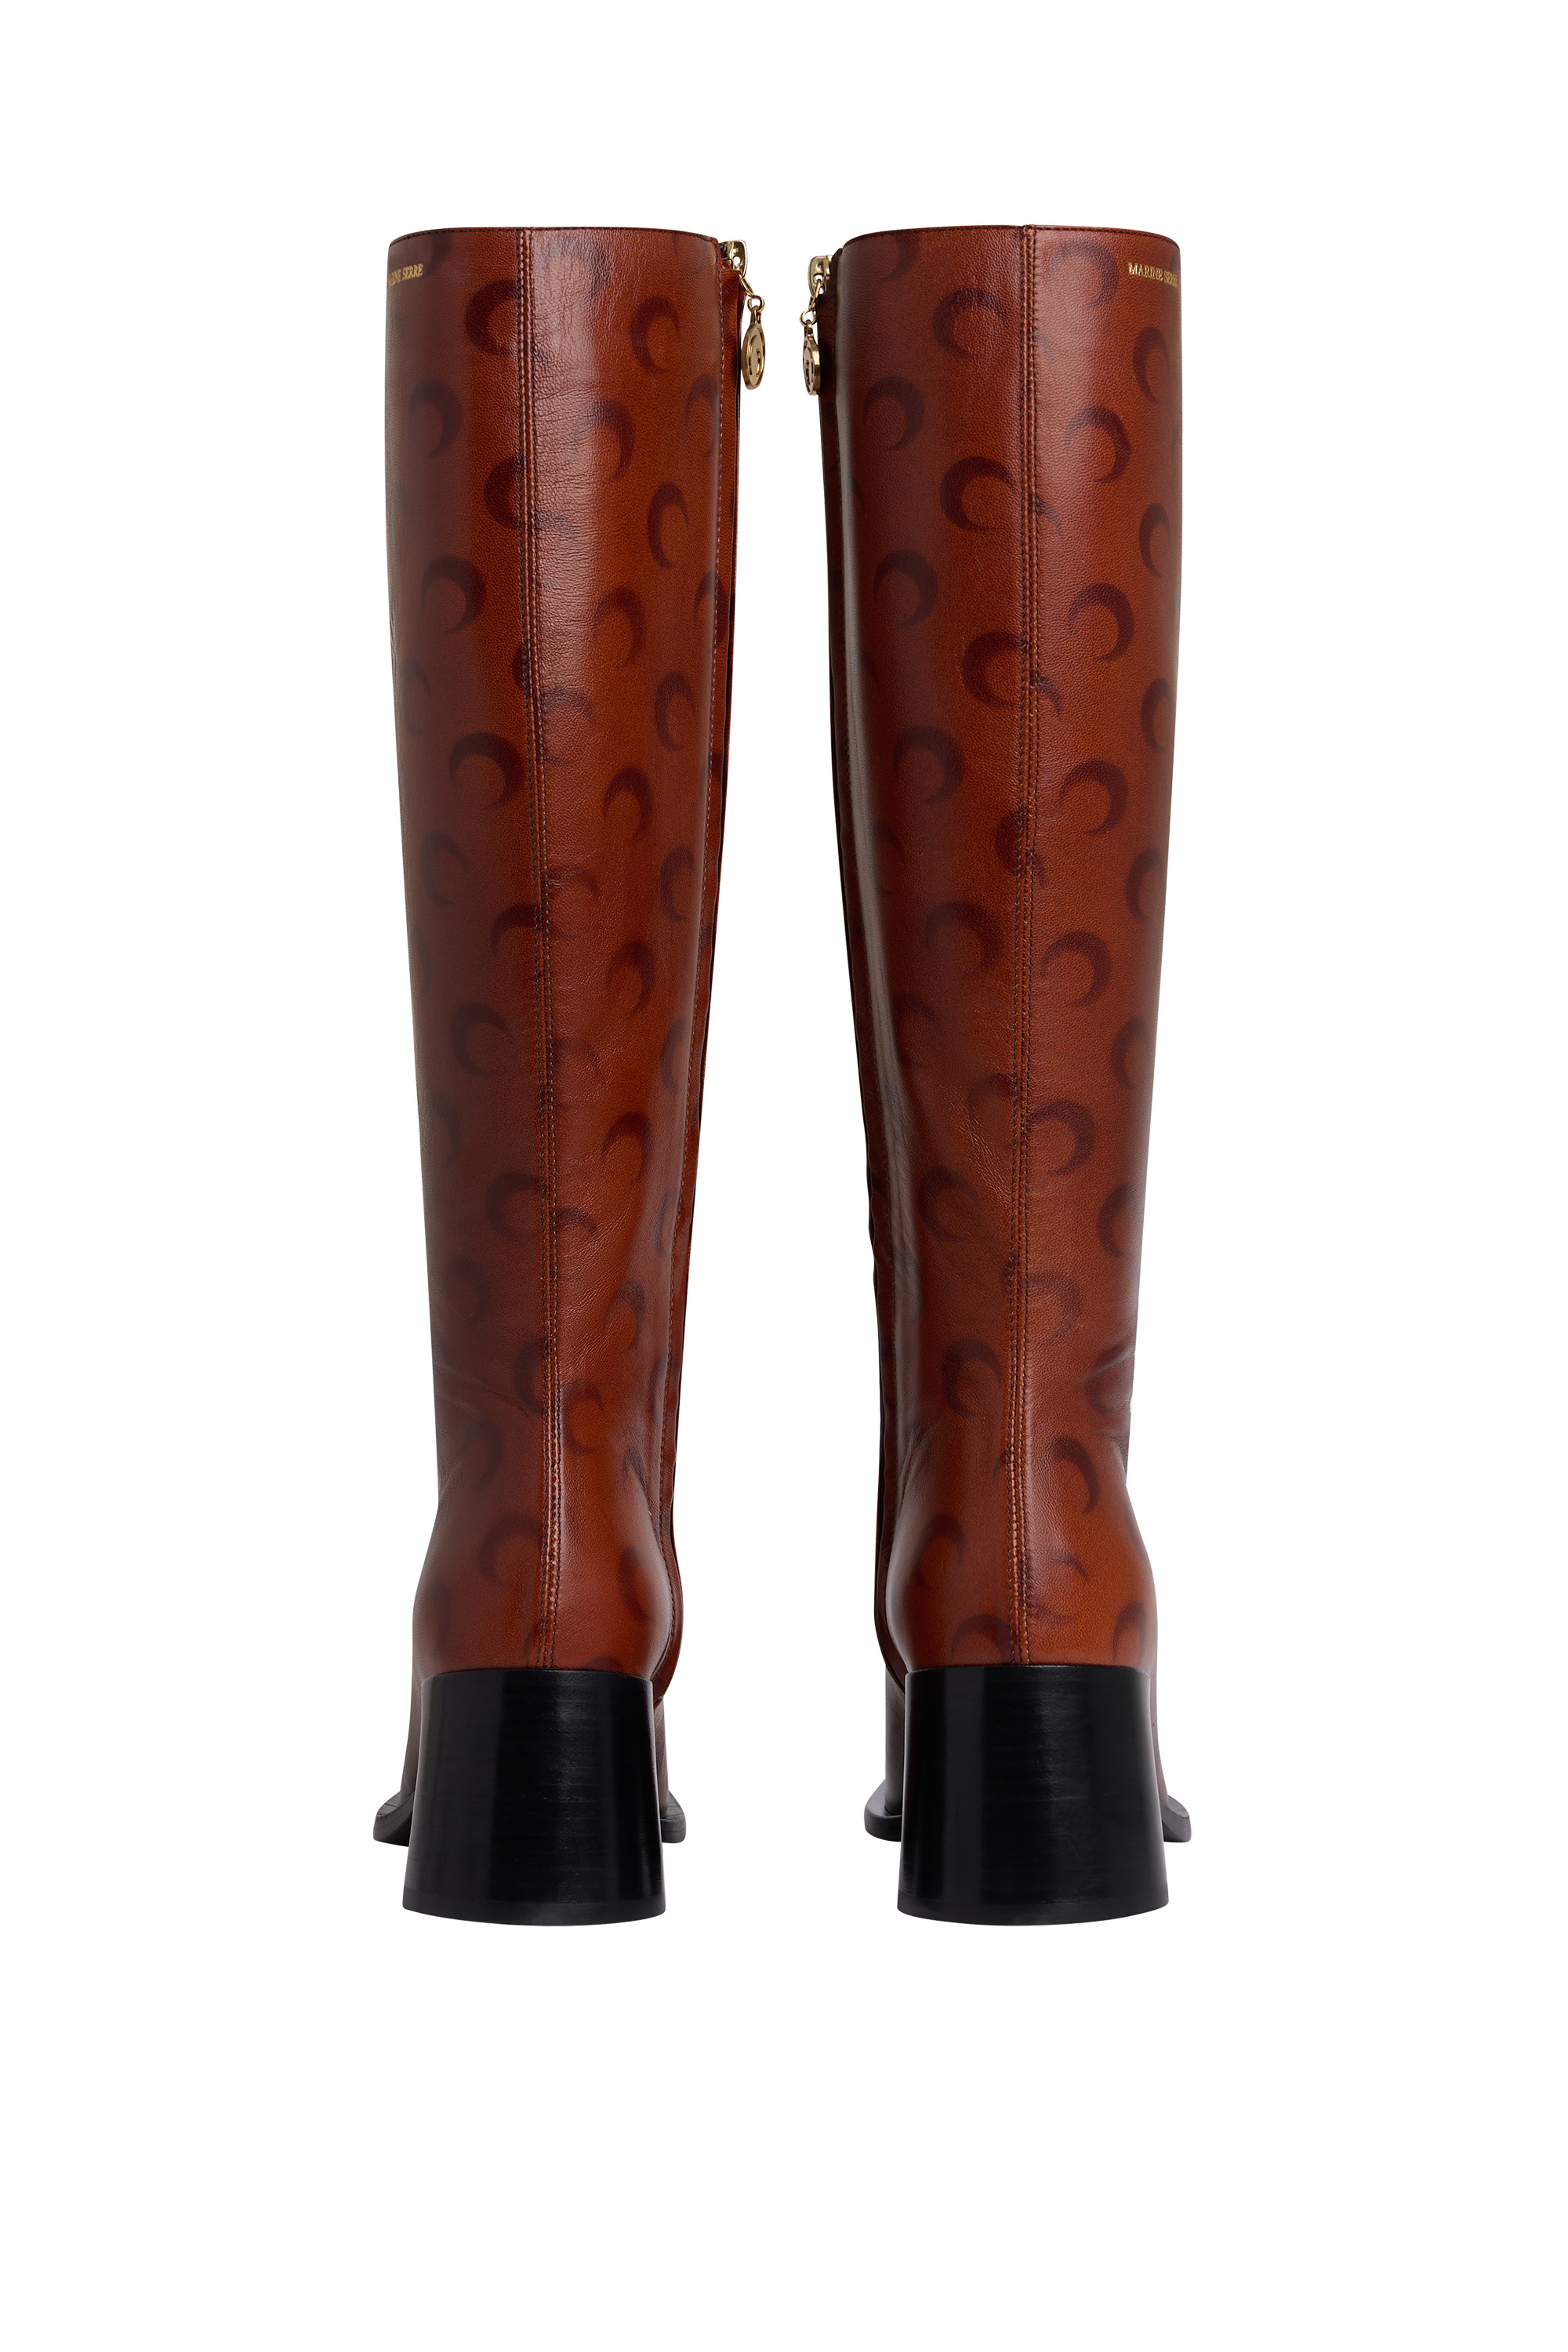 Airbrushed Crafted Leather Knee-High Boots - 3